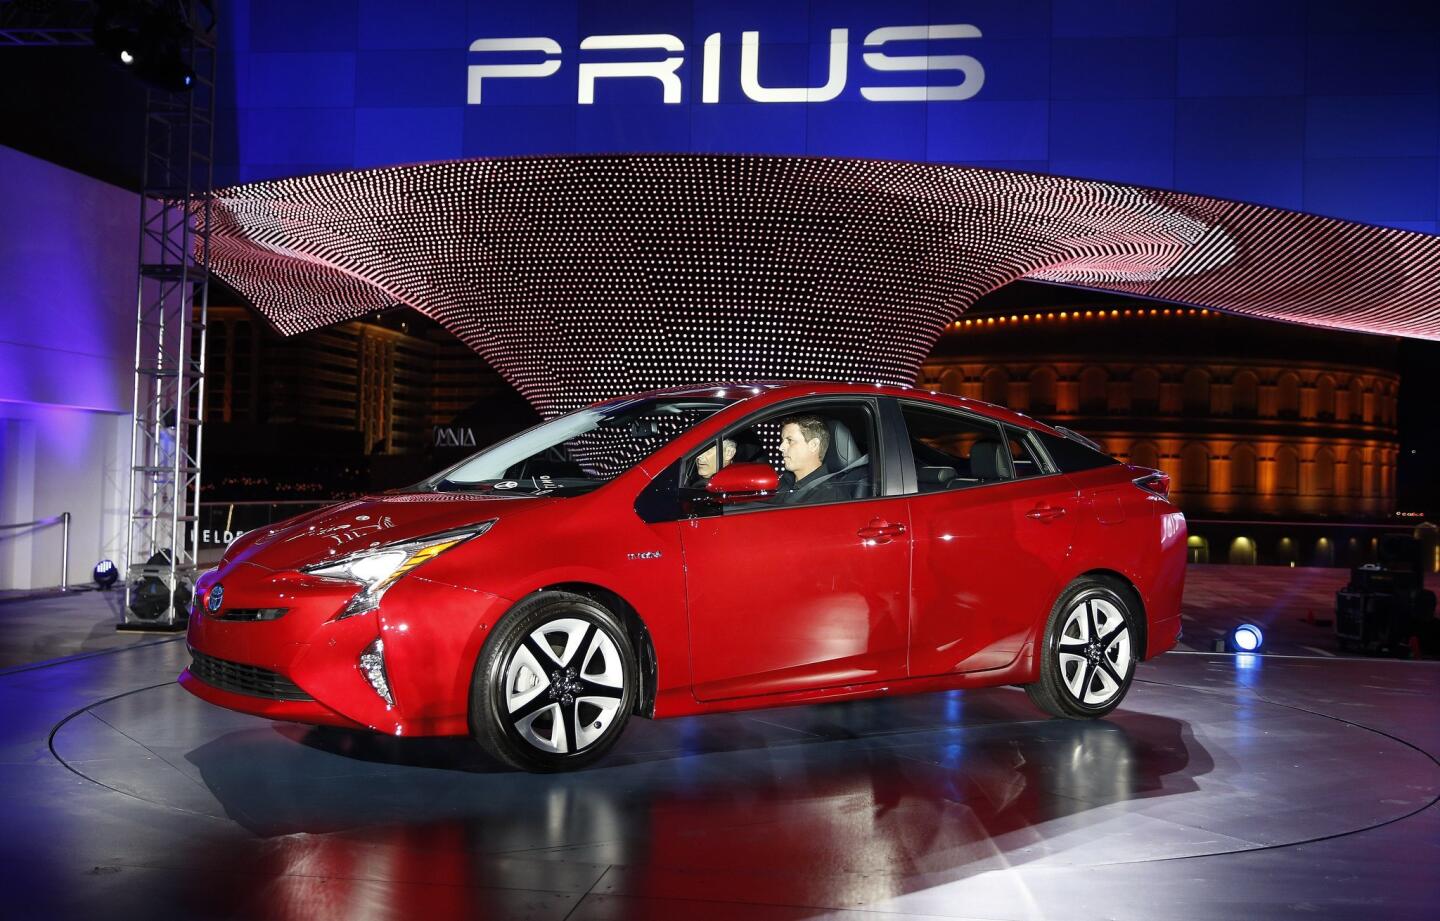 Toyota unveils the latest version of the Prius at an event Tuesday, Sept. 8, 2015, in Las Vegas.